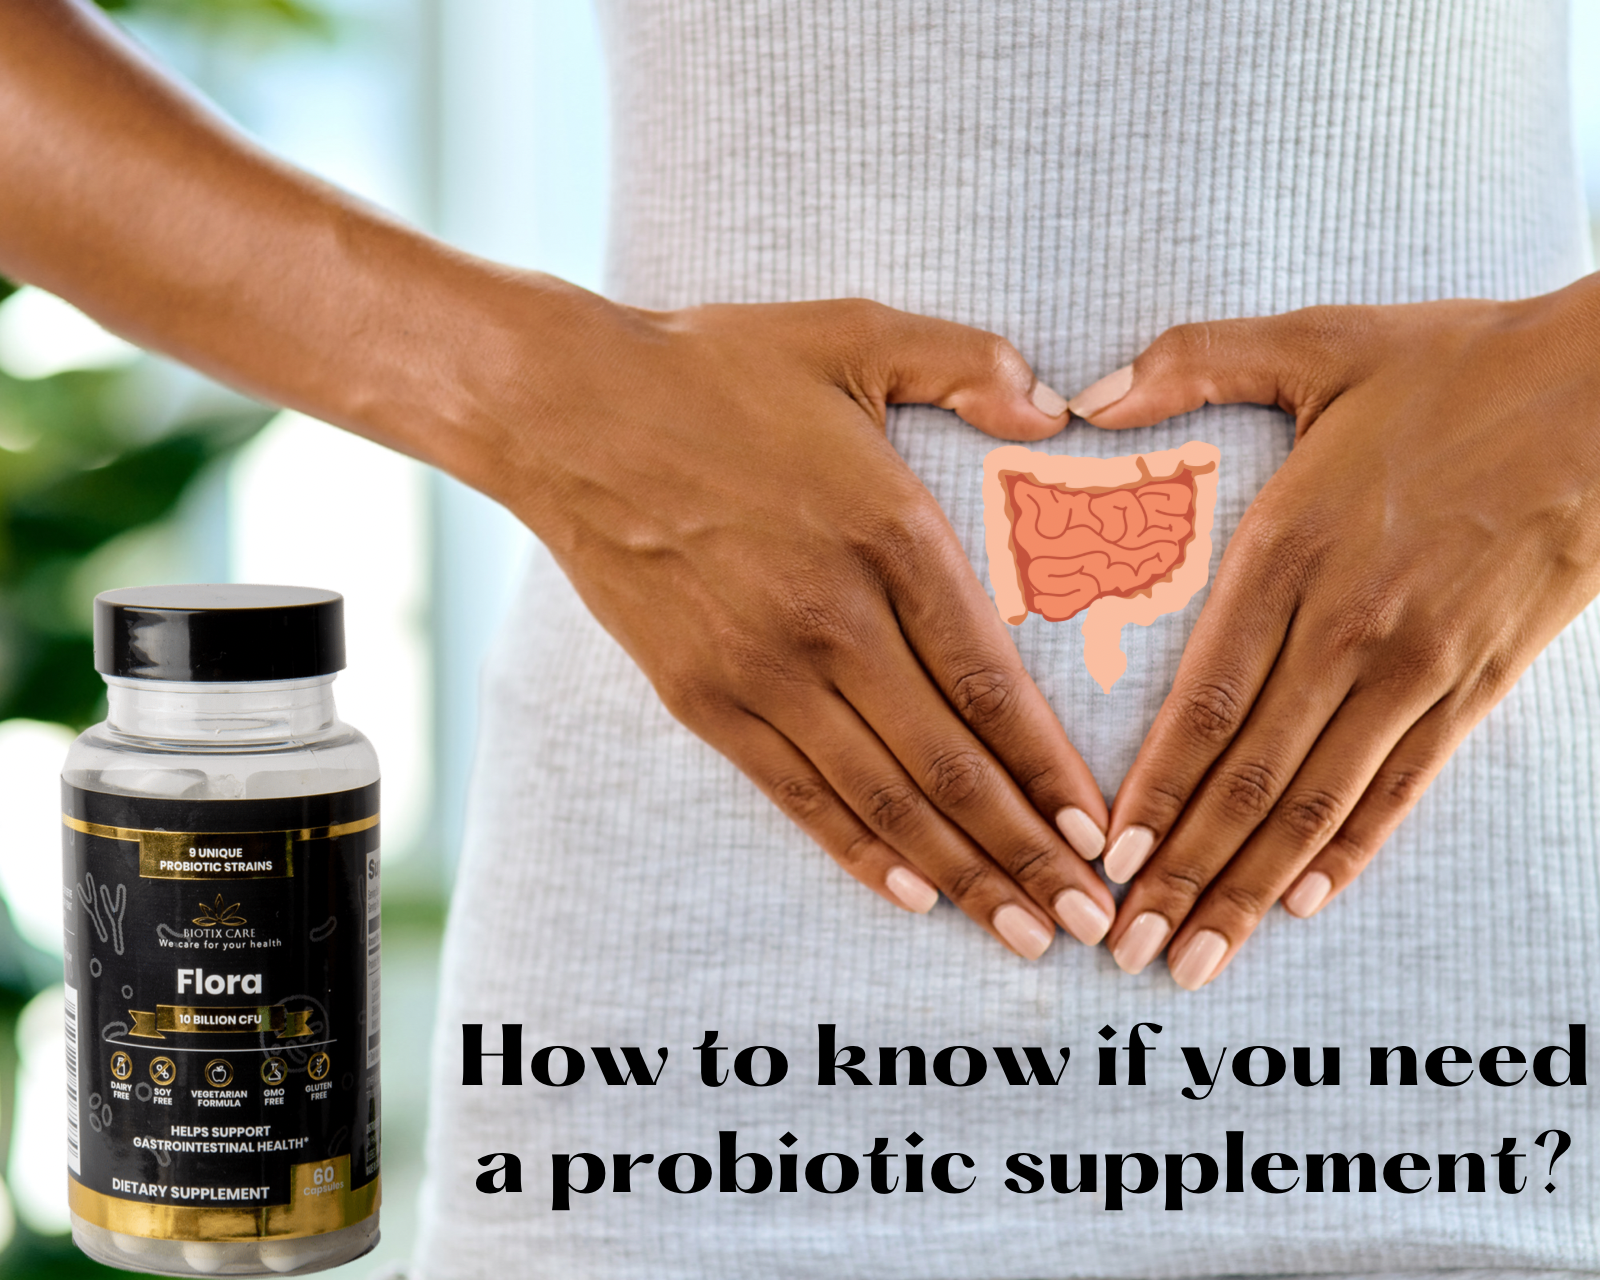 How to know if you need a probiotic supplement?